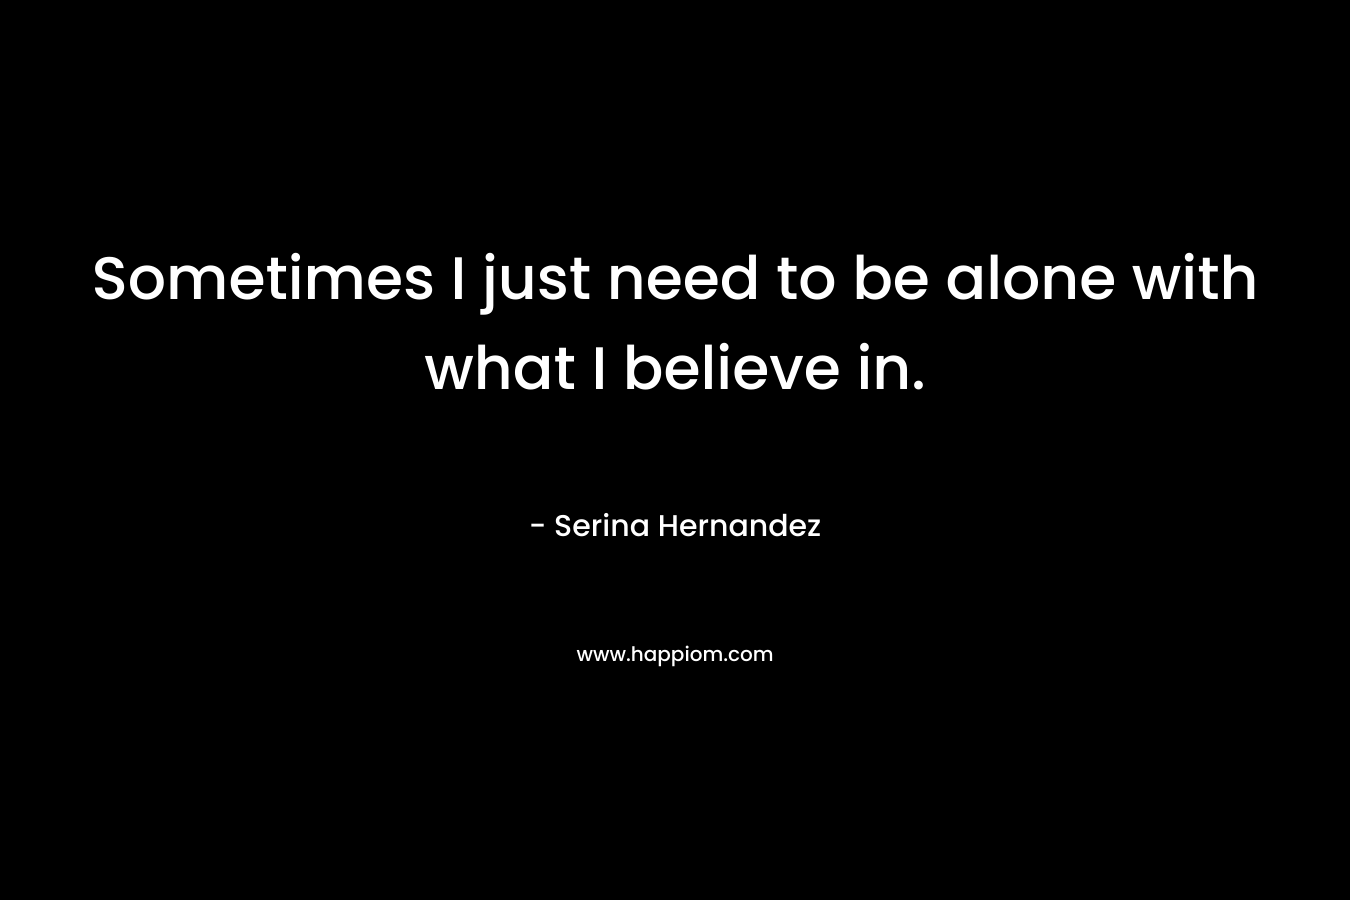 Sometimes I just need to be alone with what I believe in. – Serina Hernandez